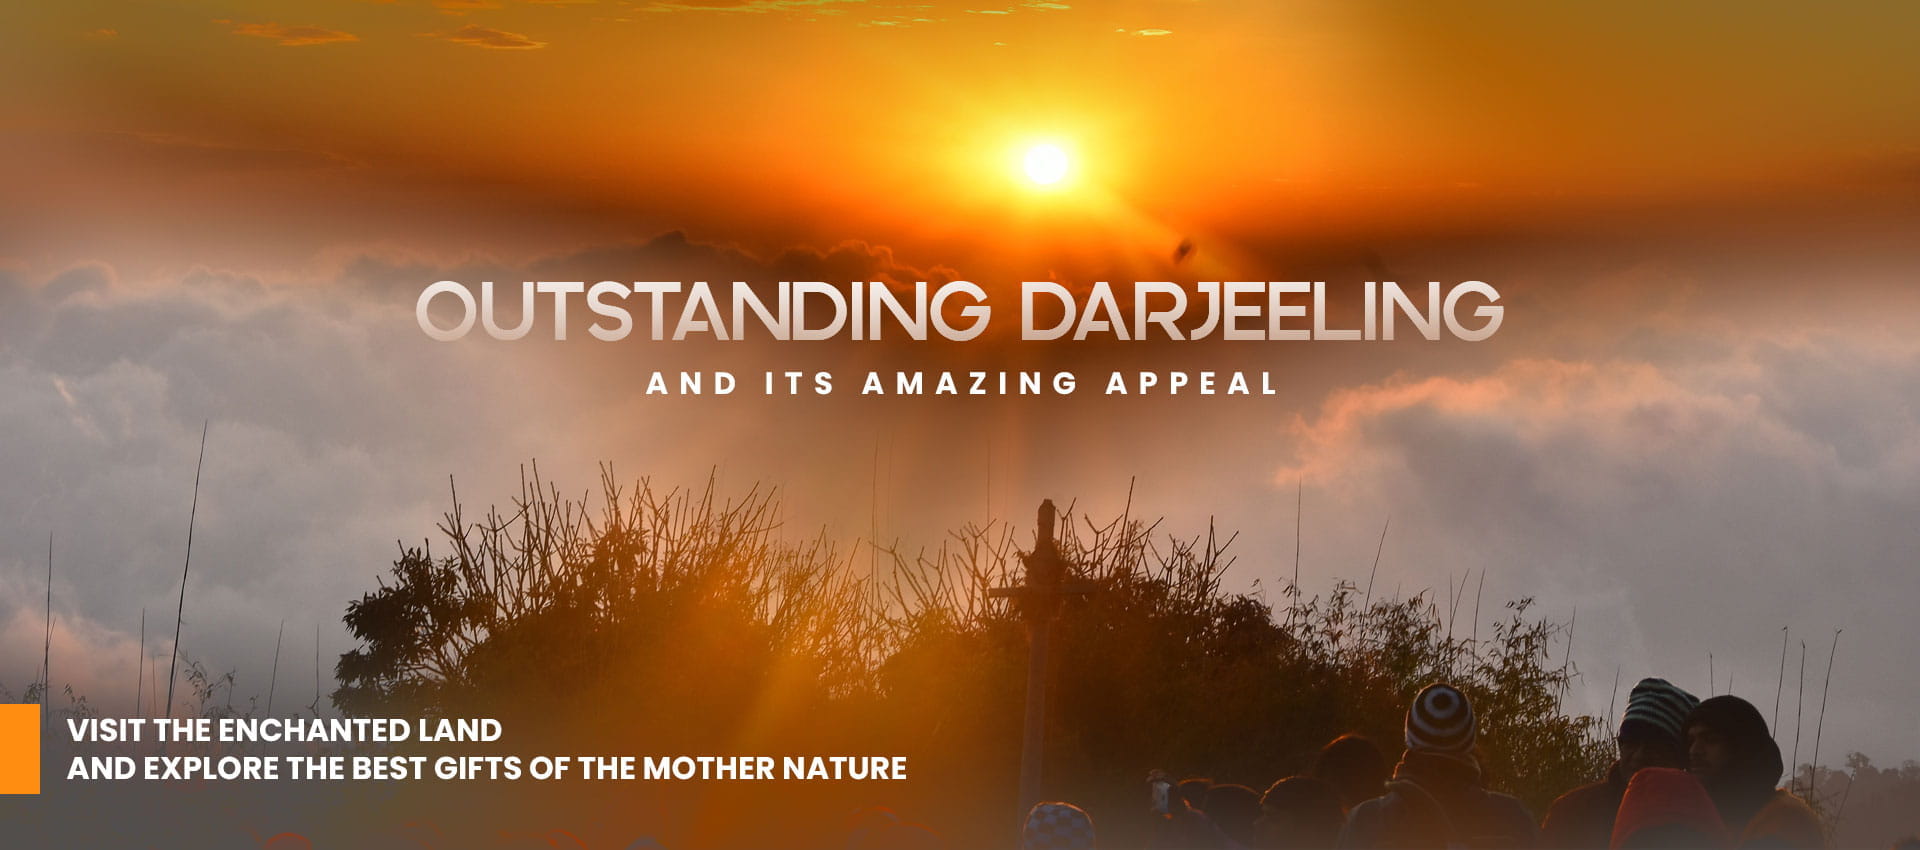 Outstanding Darjeeling and its amazing appeal